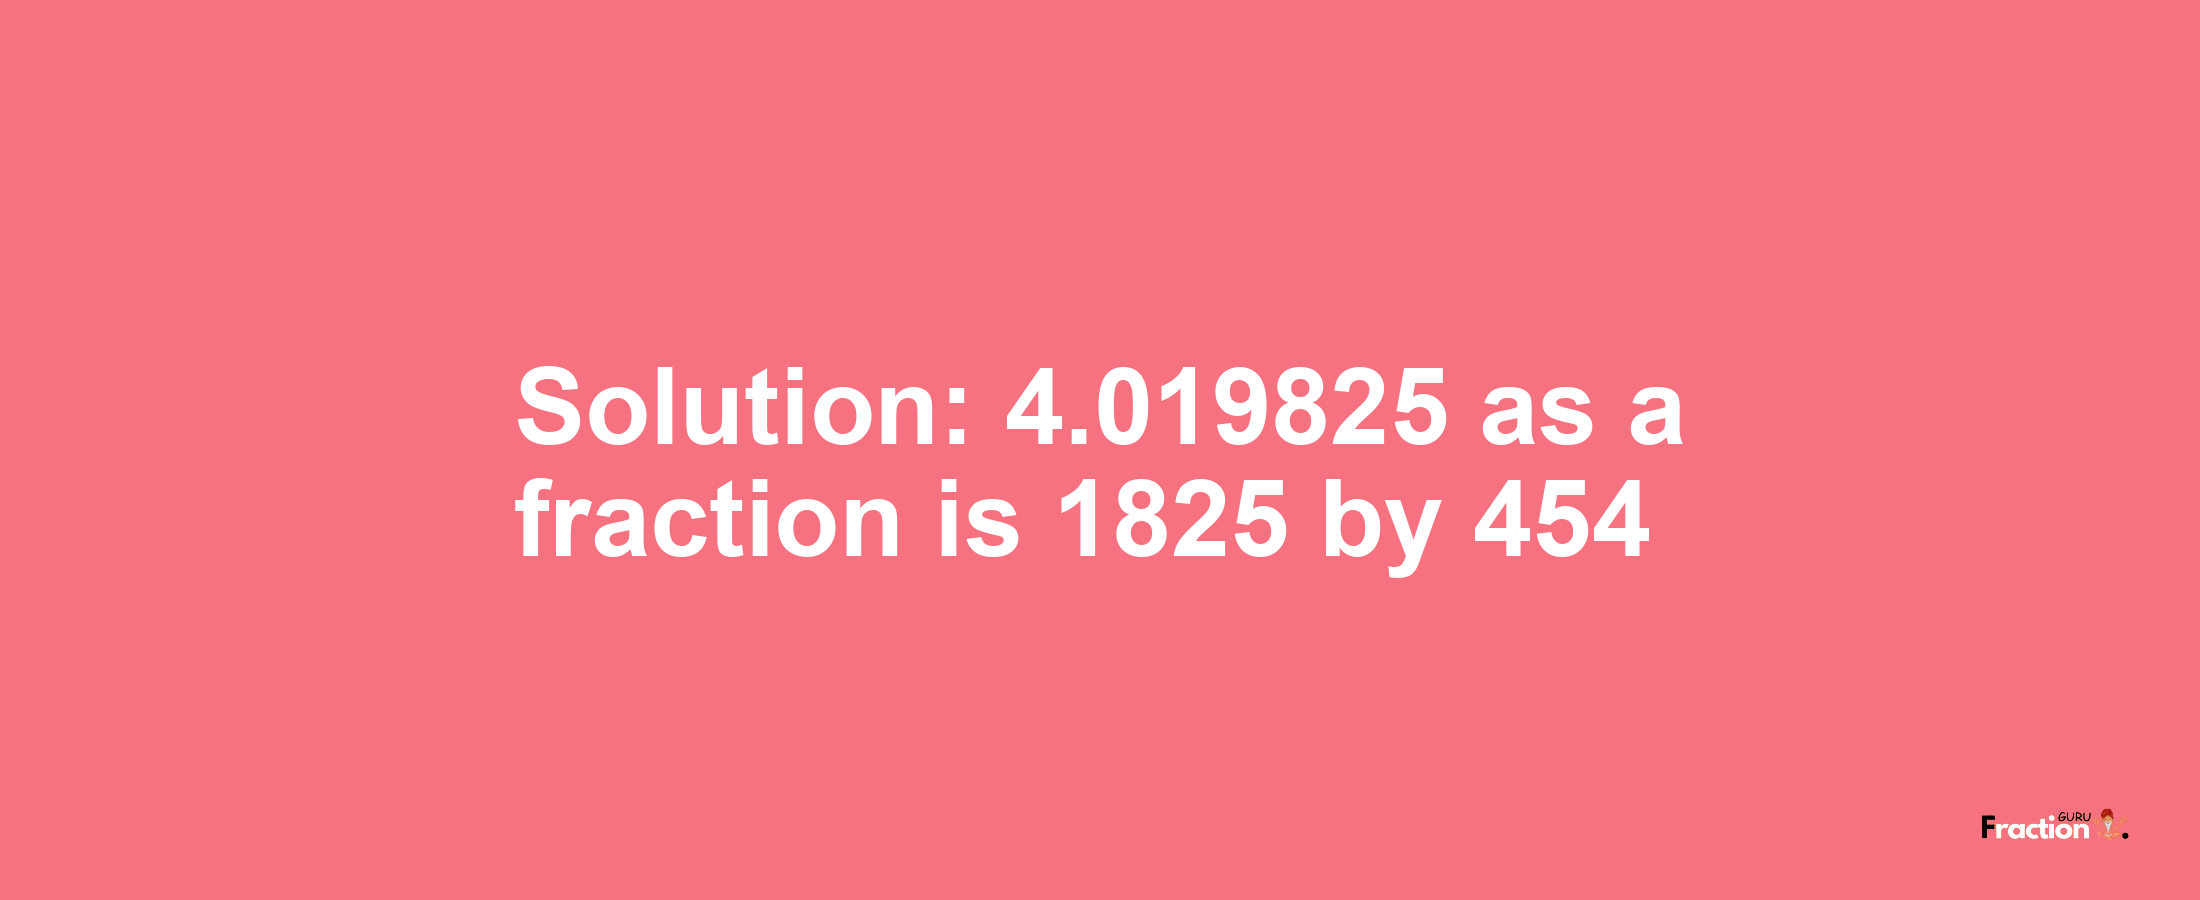 Solution:4.019825 as a fraction is 1825/454